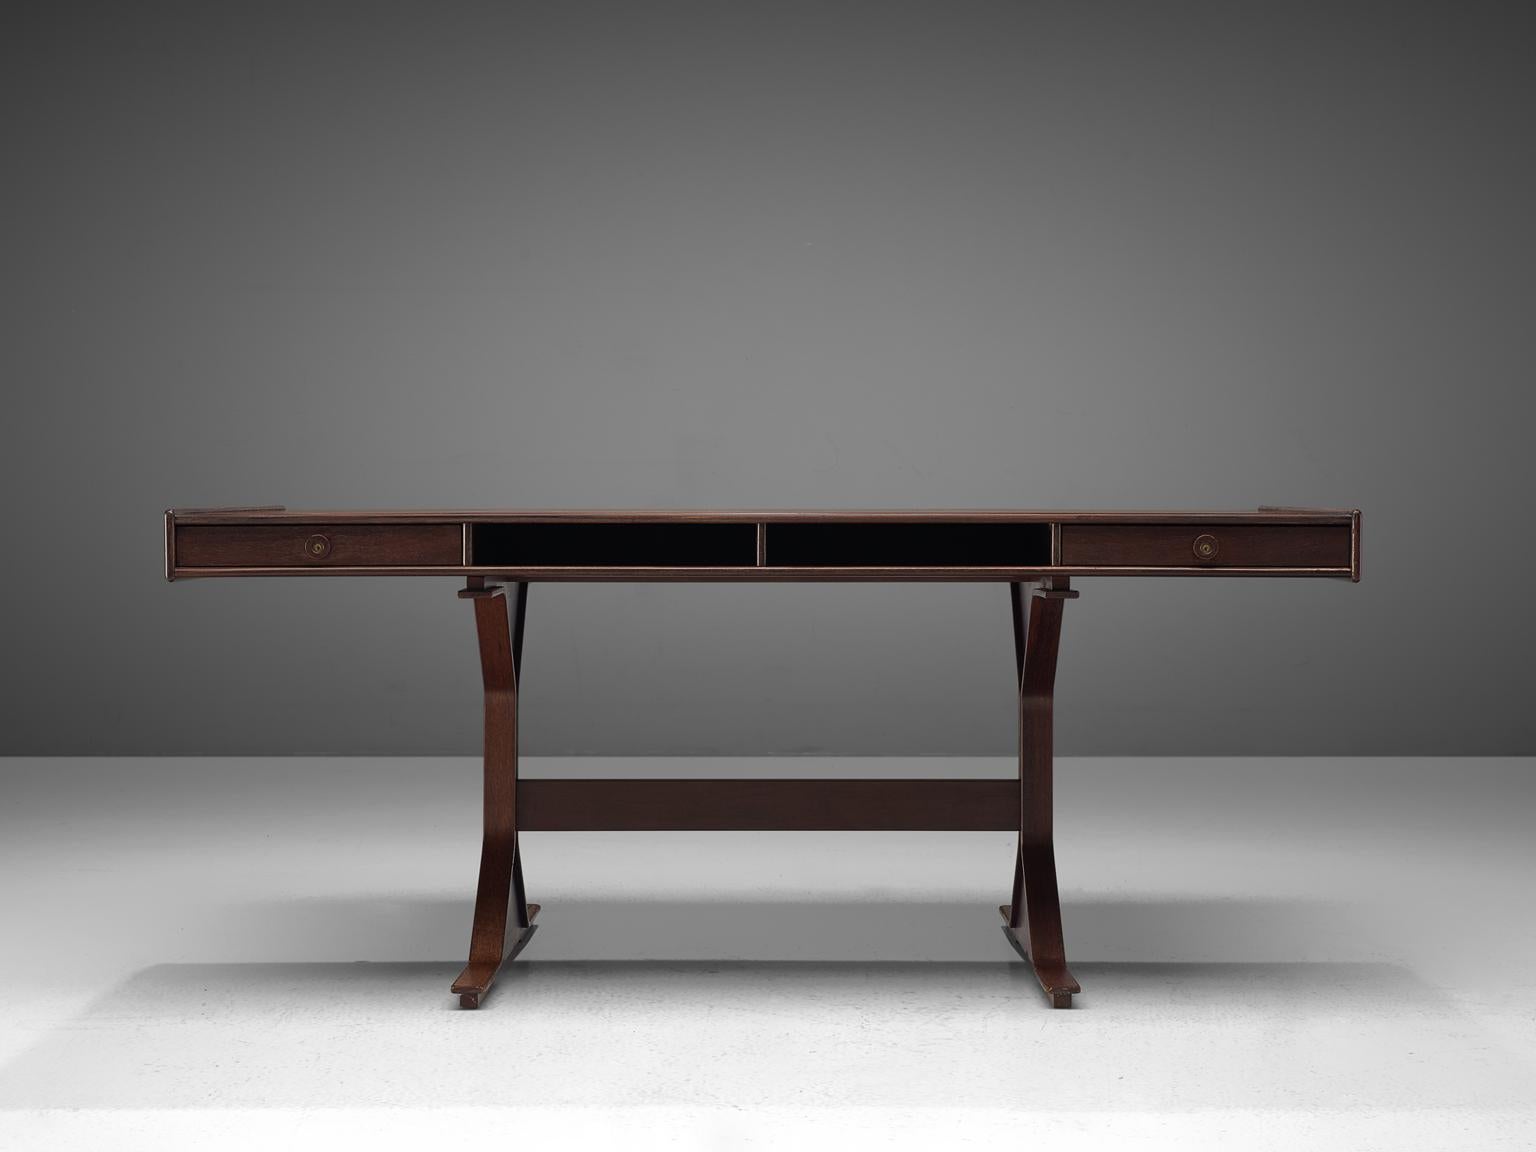 Gianfranco Frattini, for Bernini writing table, in rosewood, Italy.

This architectural writing table in rosewood is designed by Frattini. It features the typical design traits of Frattini such as pedestal legs and the borders that rise upwards